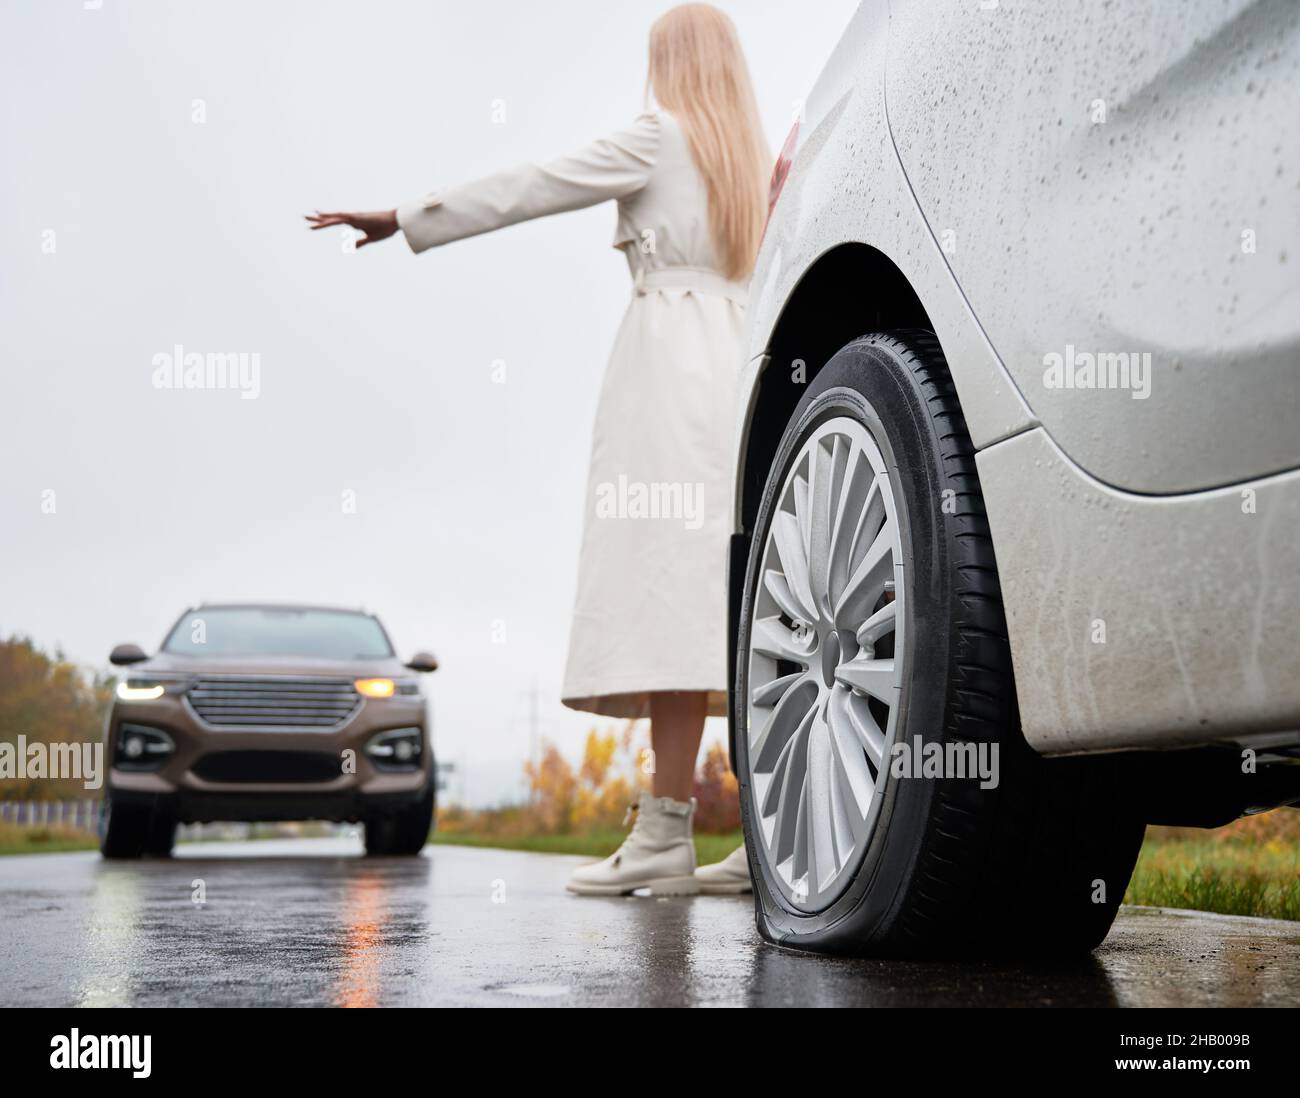 Back view of girl standing behind white vehicle with rear flat tire parked on edge of roadway and trying to stop oncoming SUV. Female driver of auto with damage tire giving stop sign to oncoming car. Stock Photo